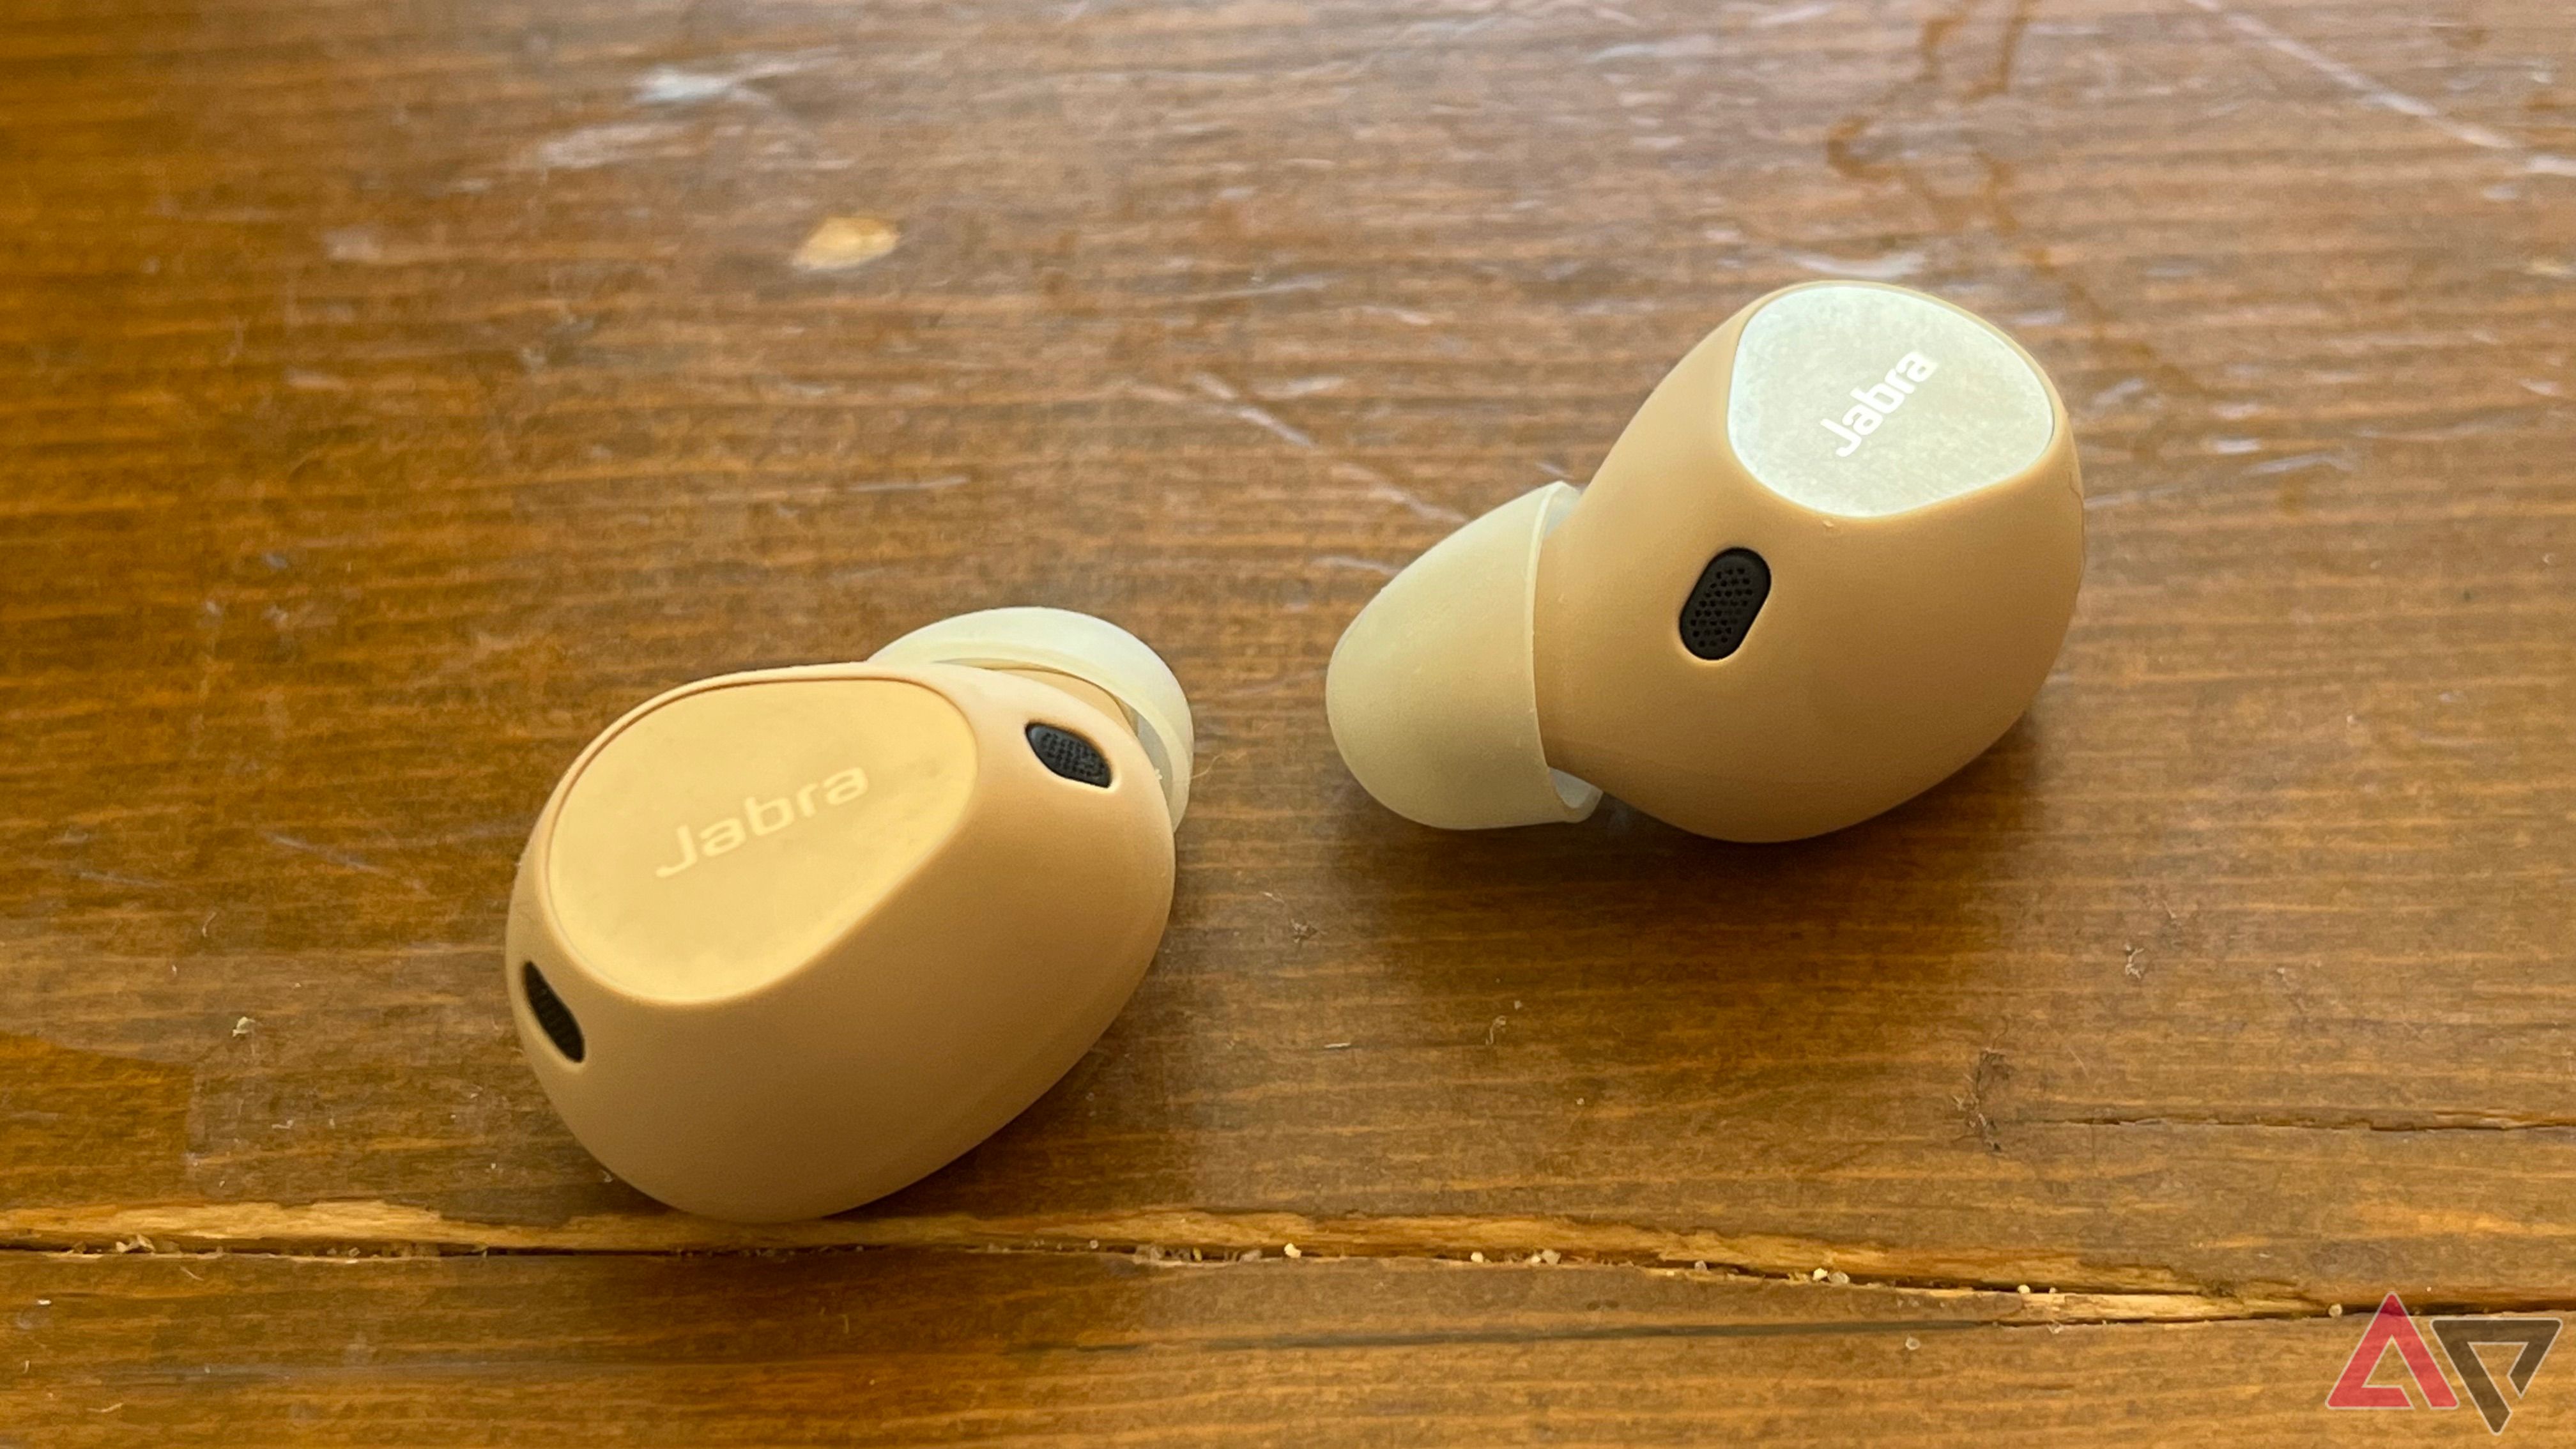 Jabra Elite 10 review: comfy noise cancelling earbuds with spatial